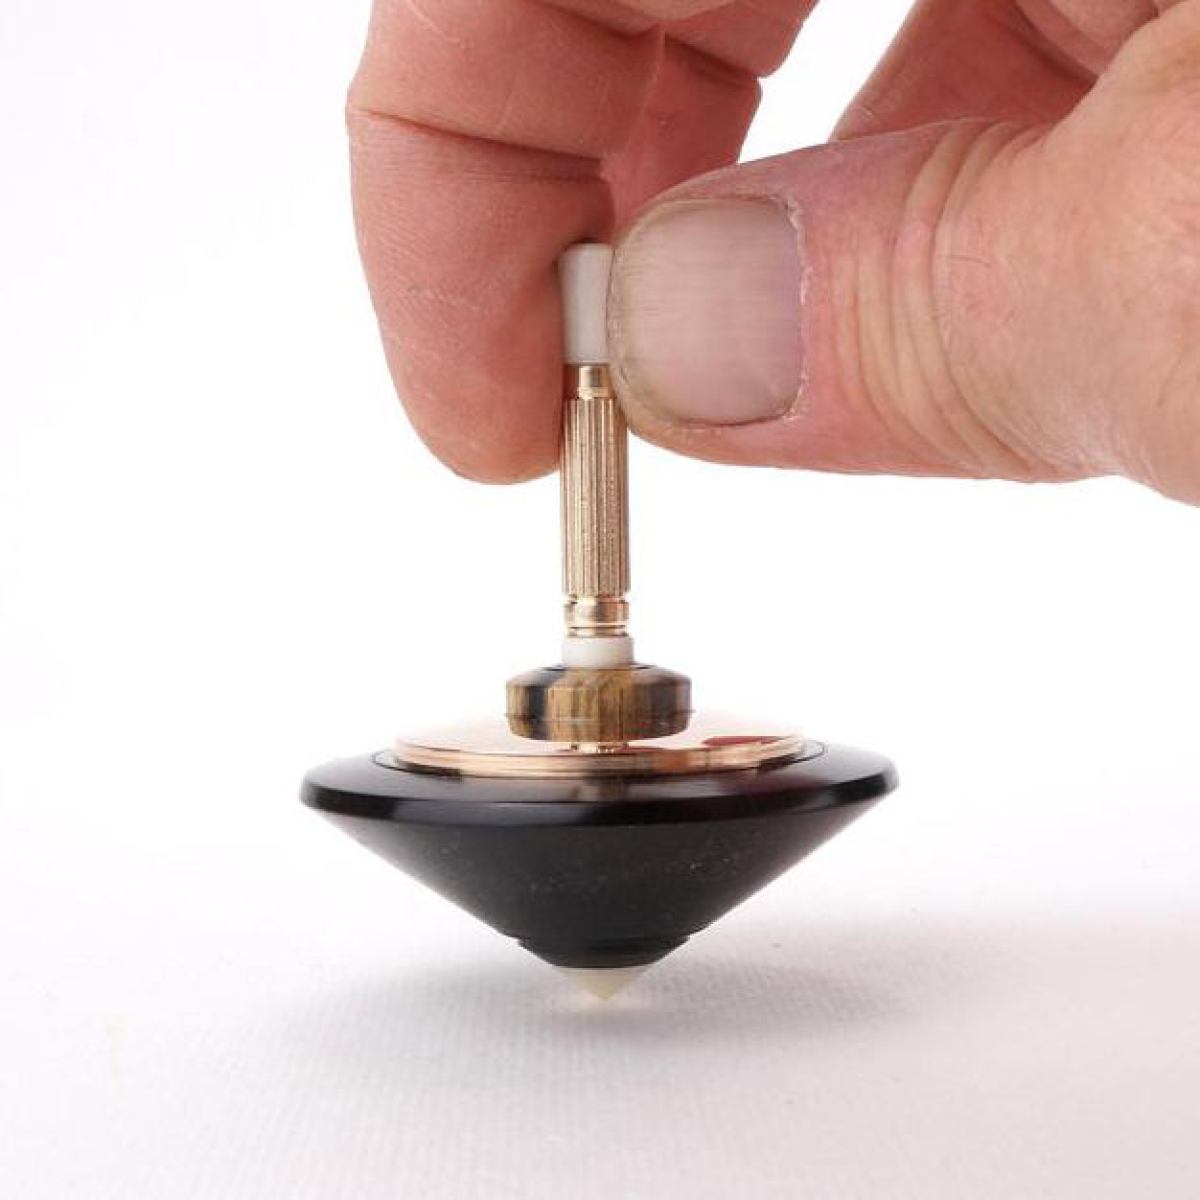 Exclusive Spinning Top made of Fine Woods, Brass and Bone